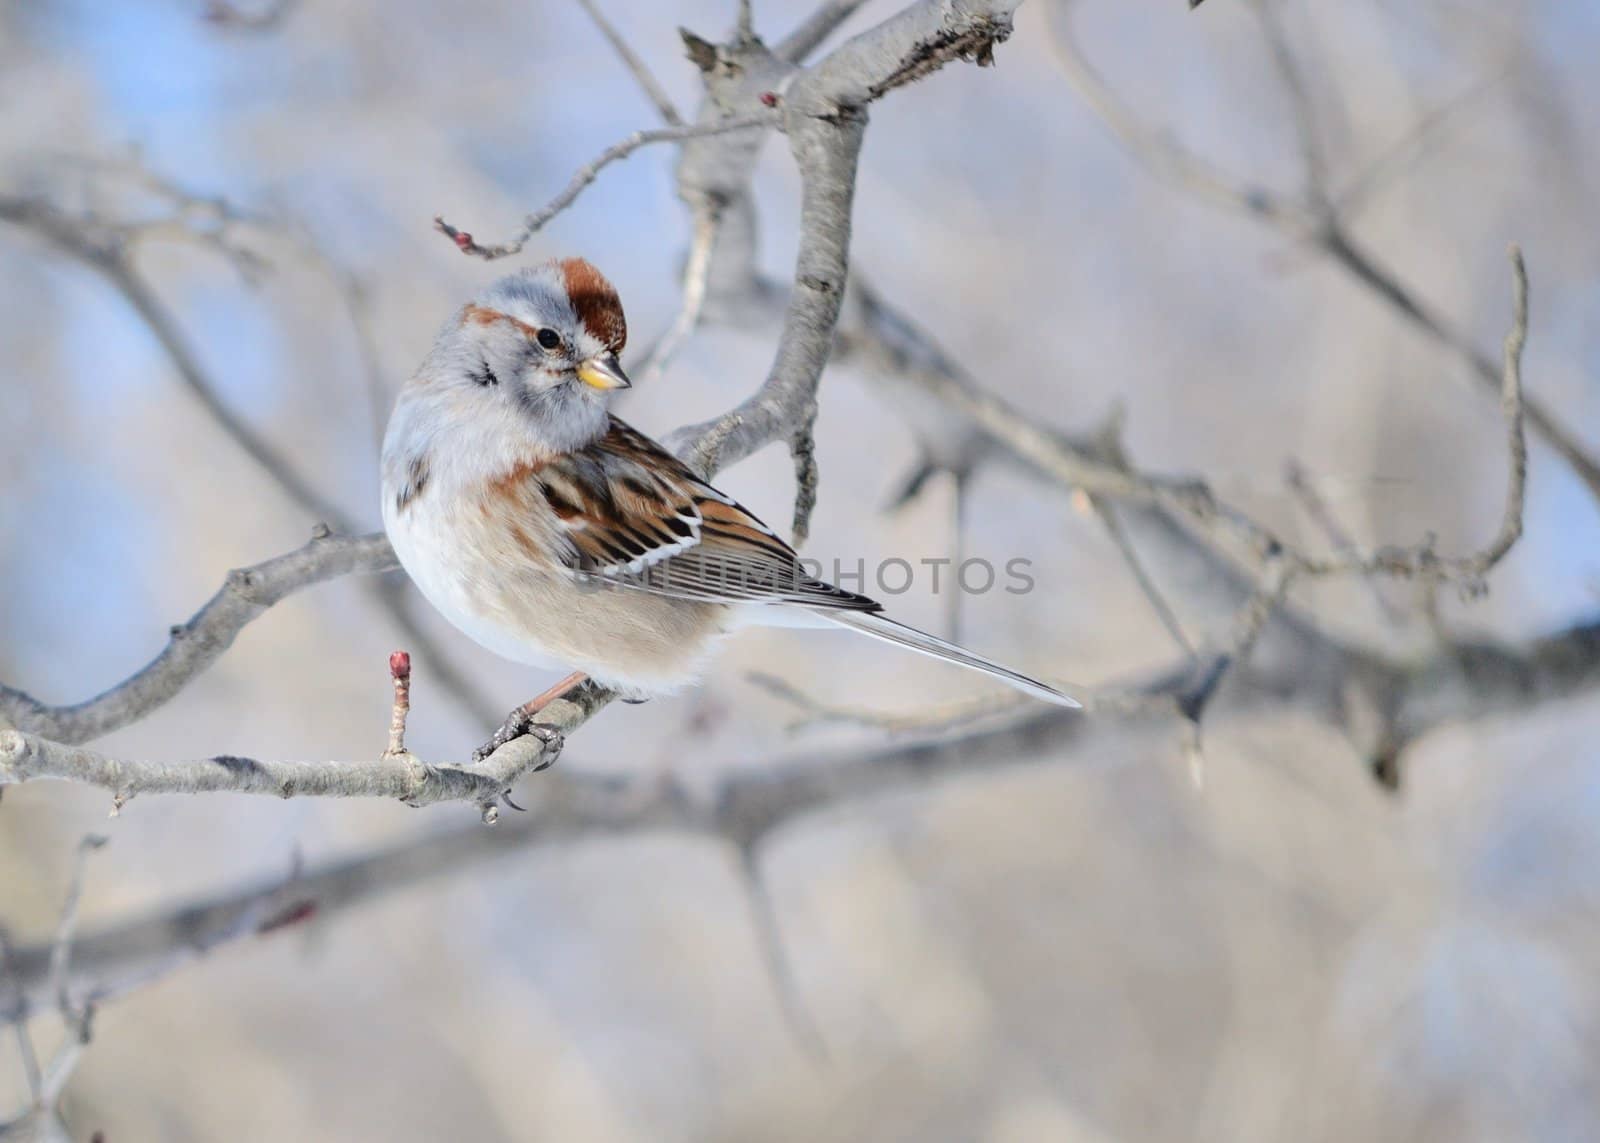 A tree sparrow perched on a tree branch.